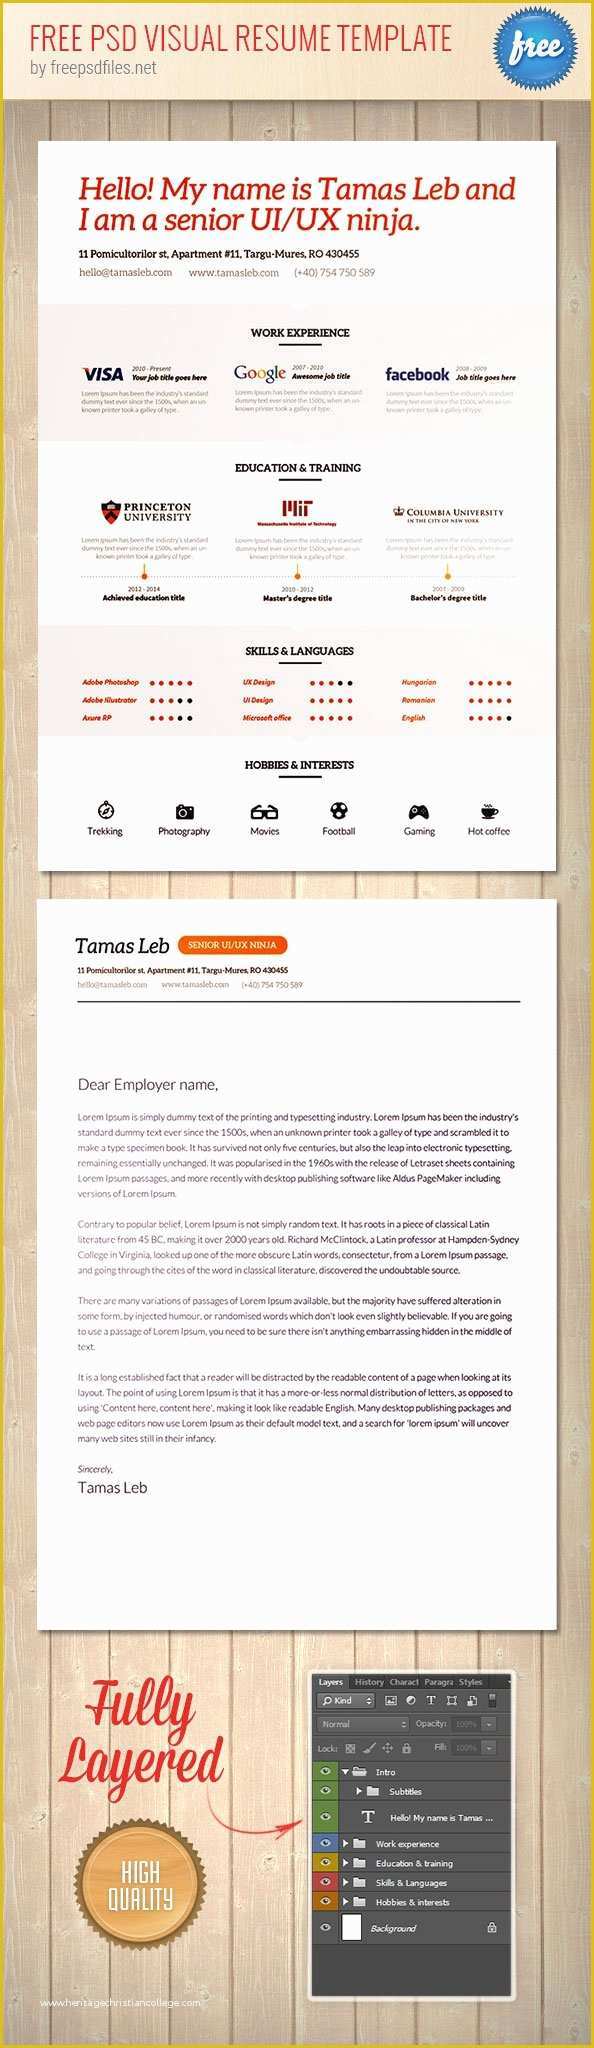 Free Resume Template Psd Of 34 Free Psd Cv Resumes to Find A Good Job